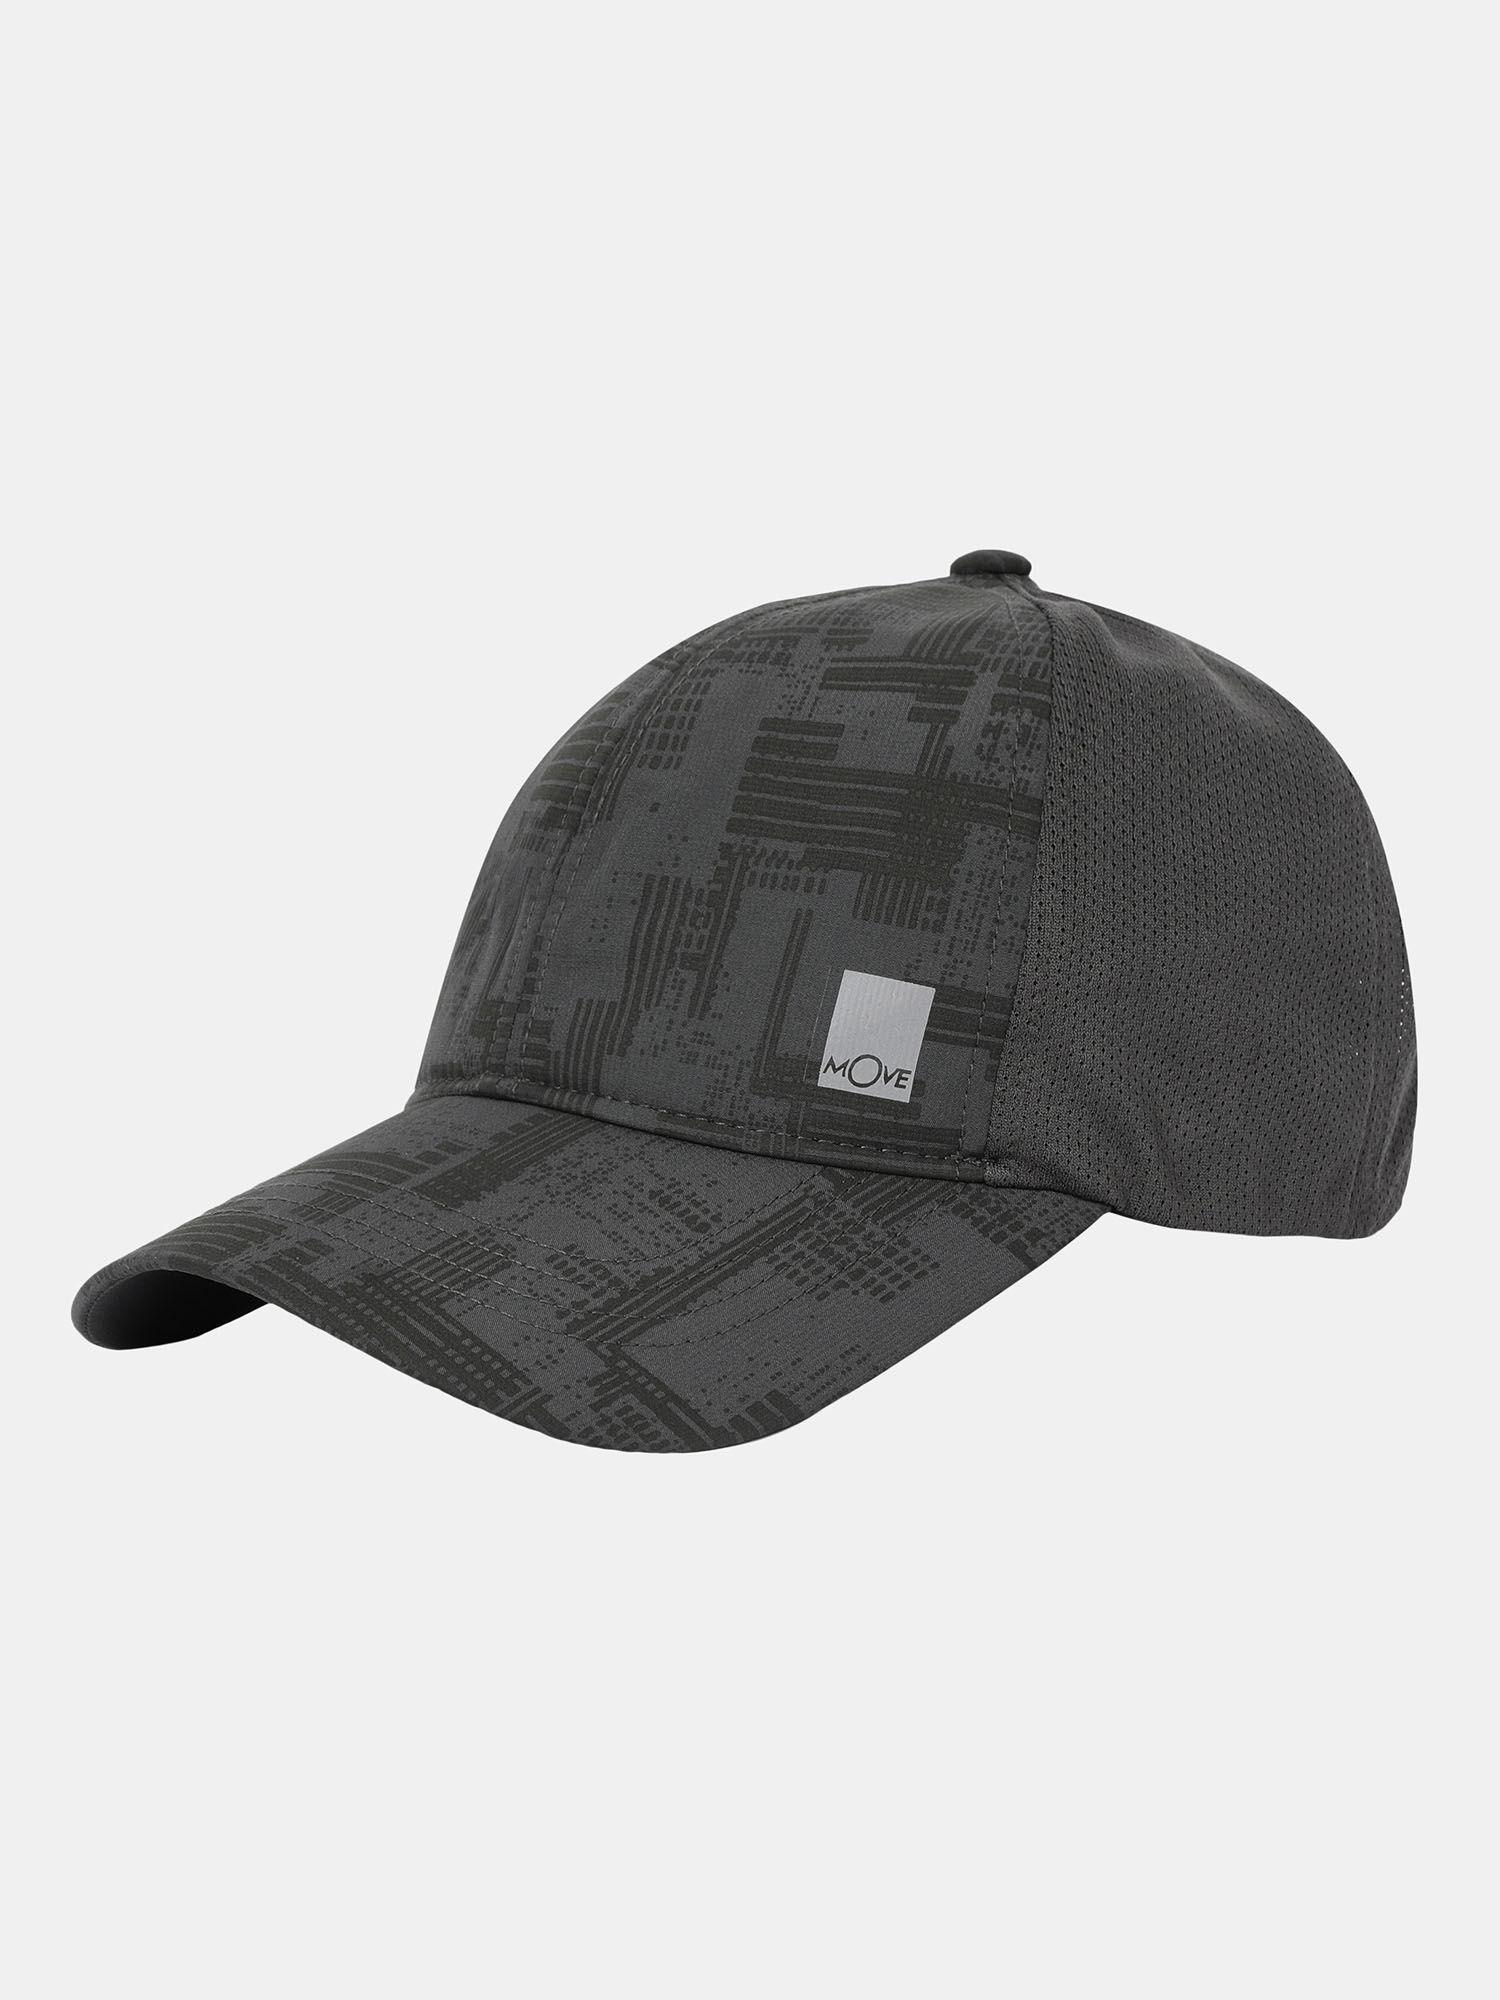 cp23 polyester printed cap with adjustable back closure and stay dry graphite